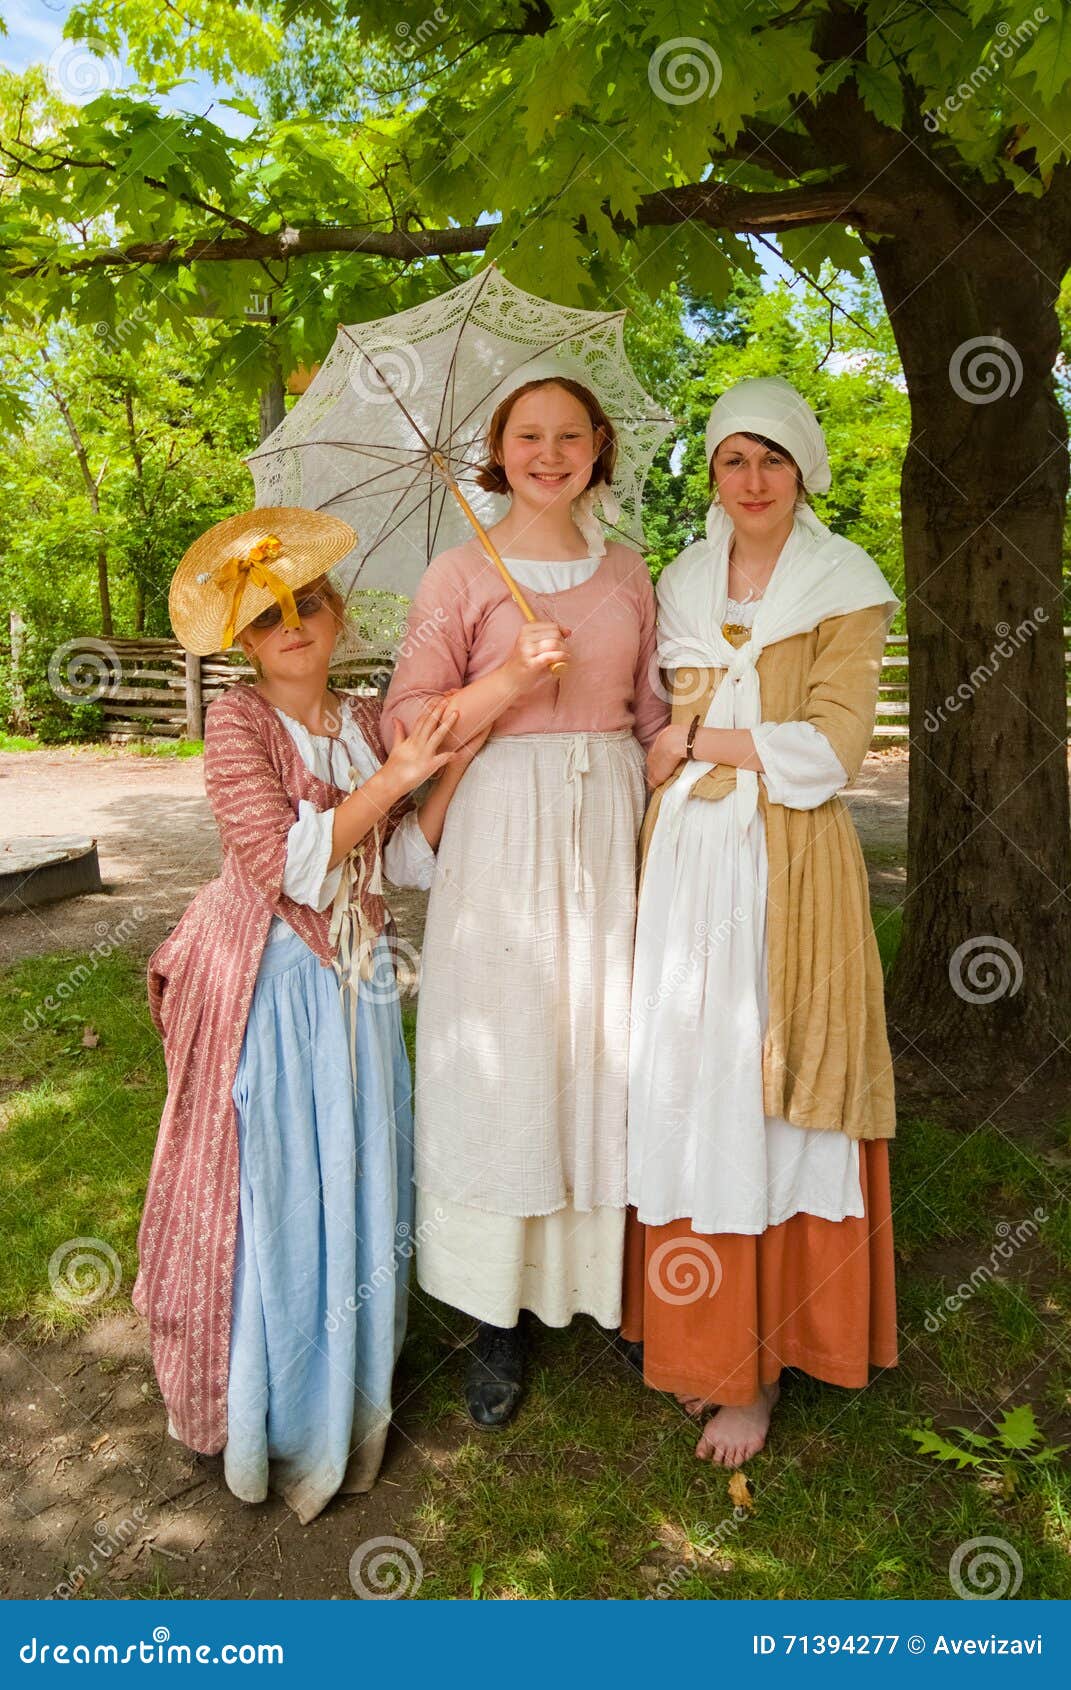 Three Young Female Models Demonstrating Old Fashion Cloths